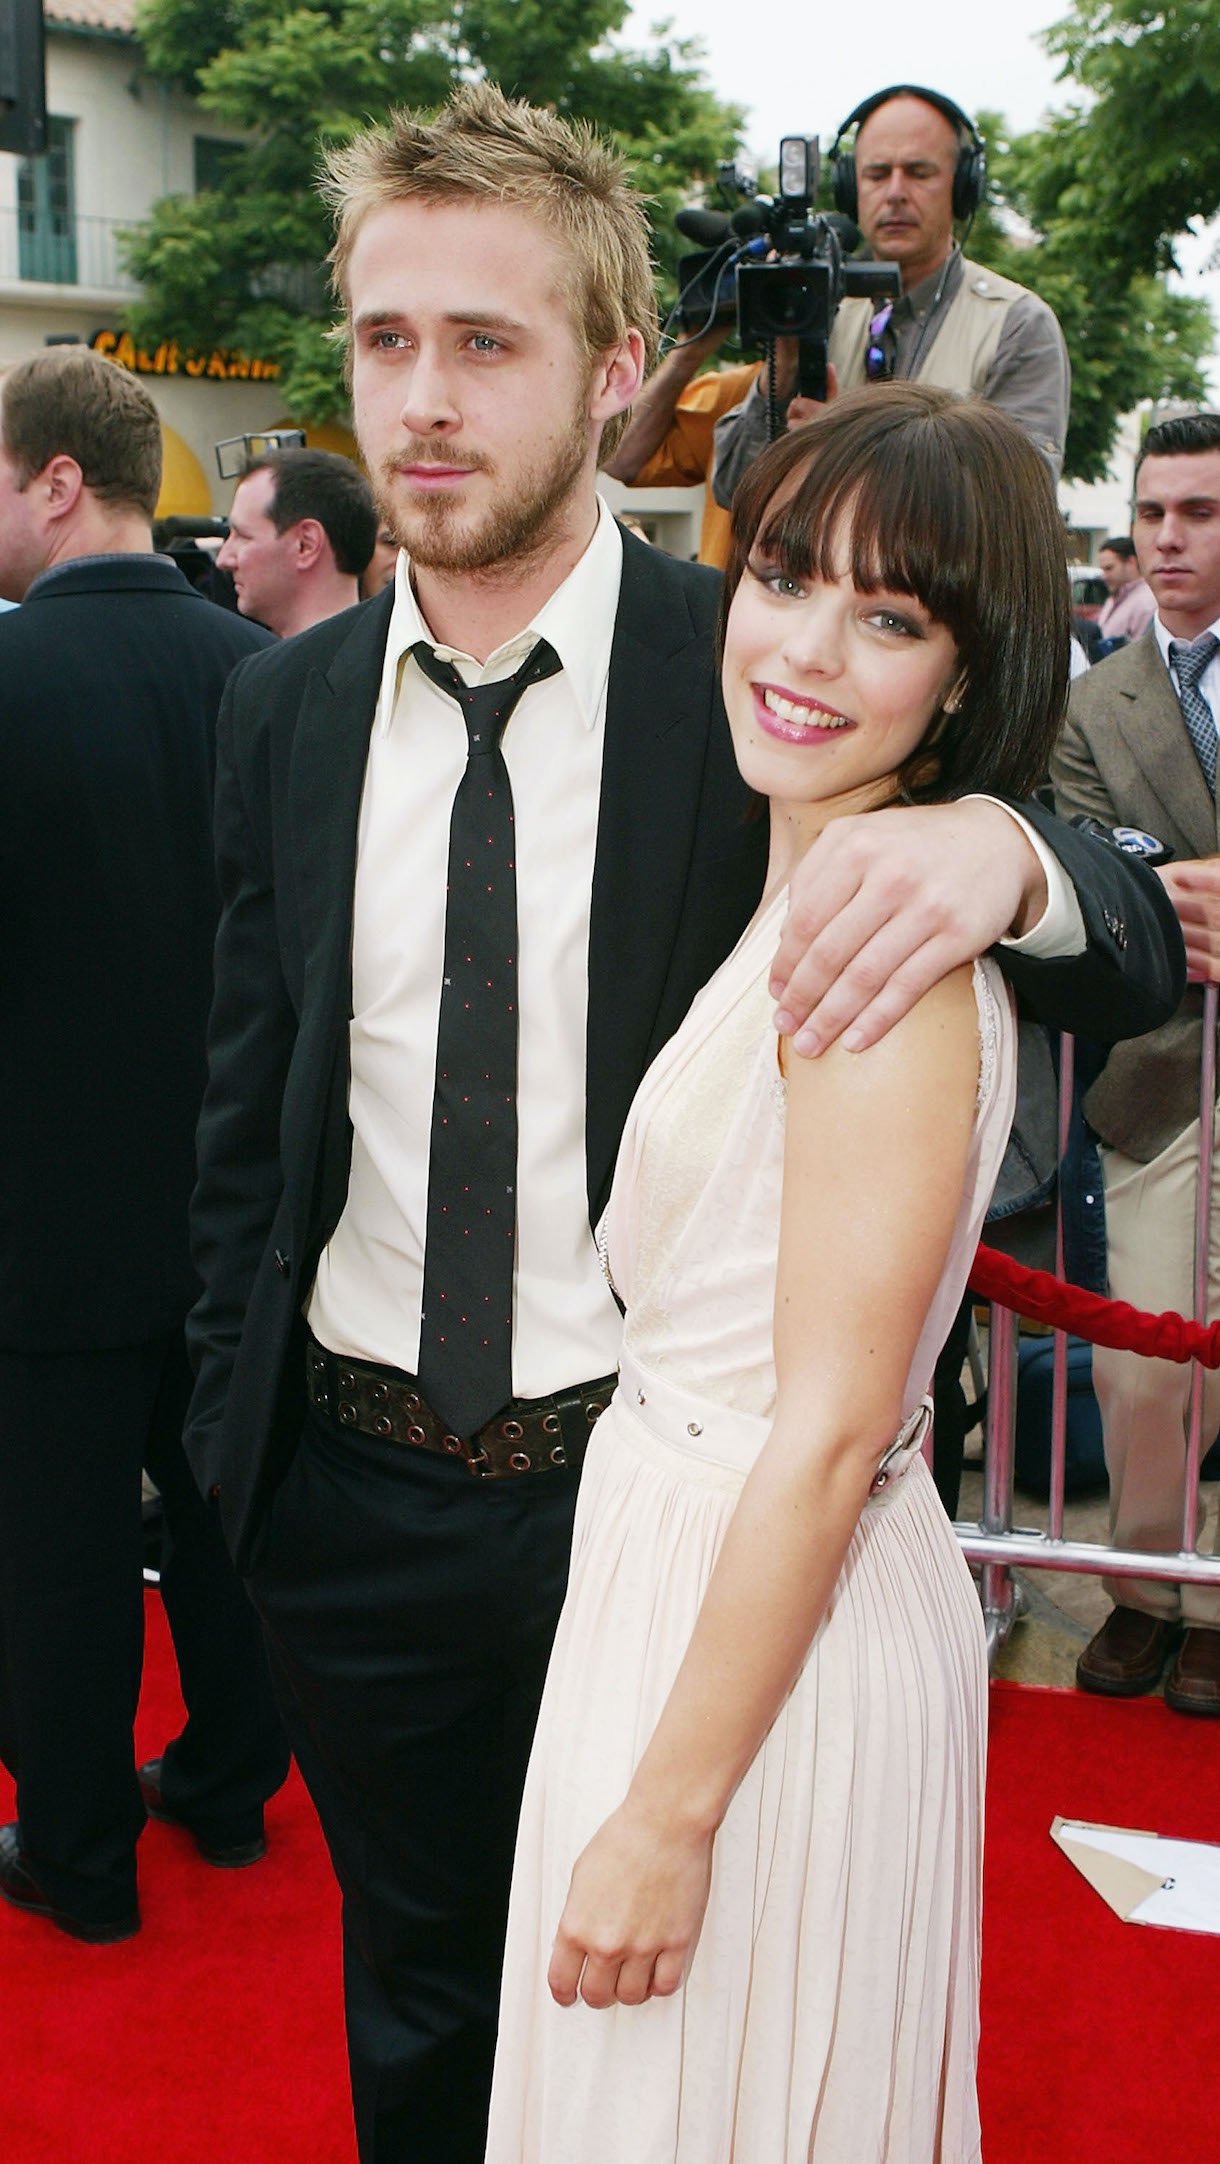 Actors Ryan Gosling (L) and Rachel McAdams pose at the premiere of New Lines' 'The Notebook' at the Village Theatre on June 21, 2004 in Los Angeles